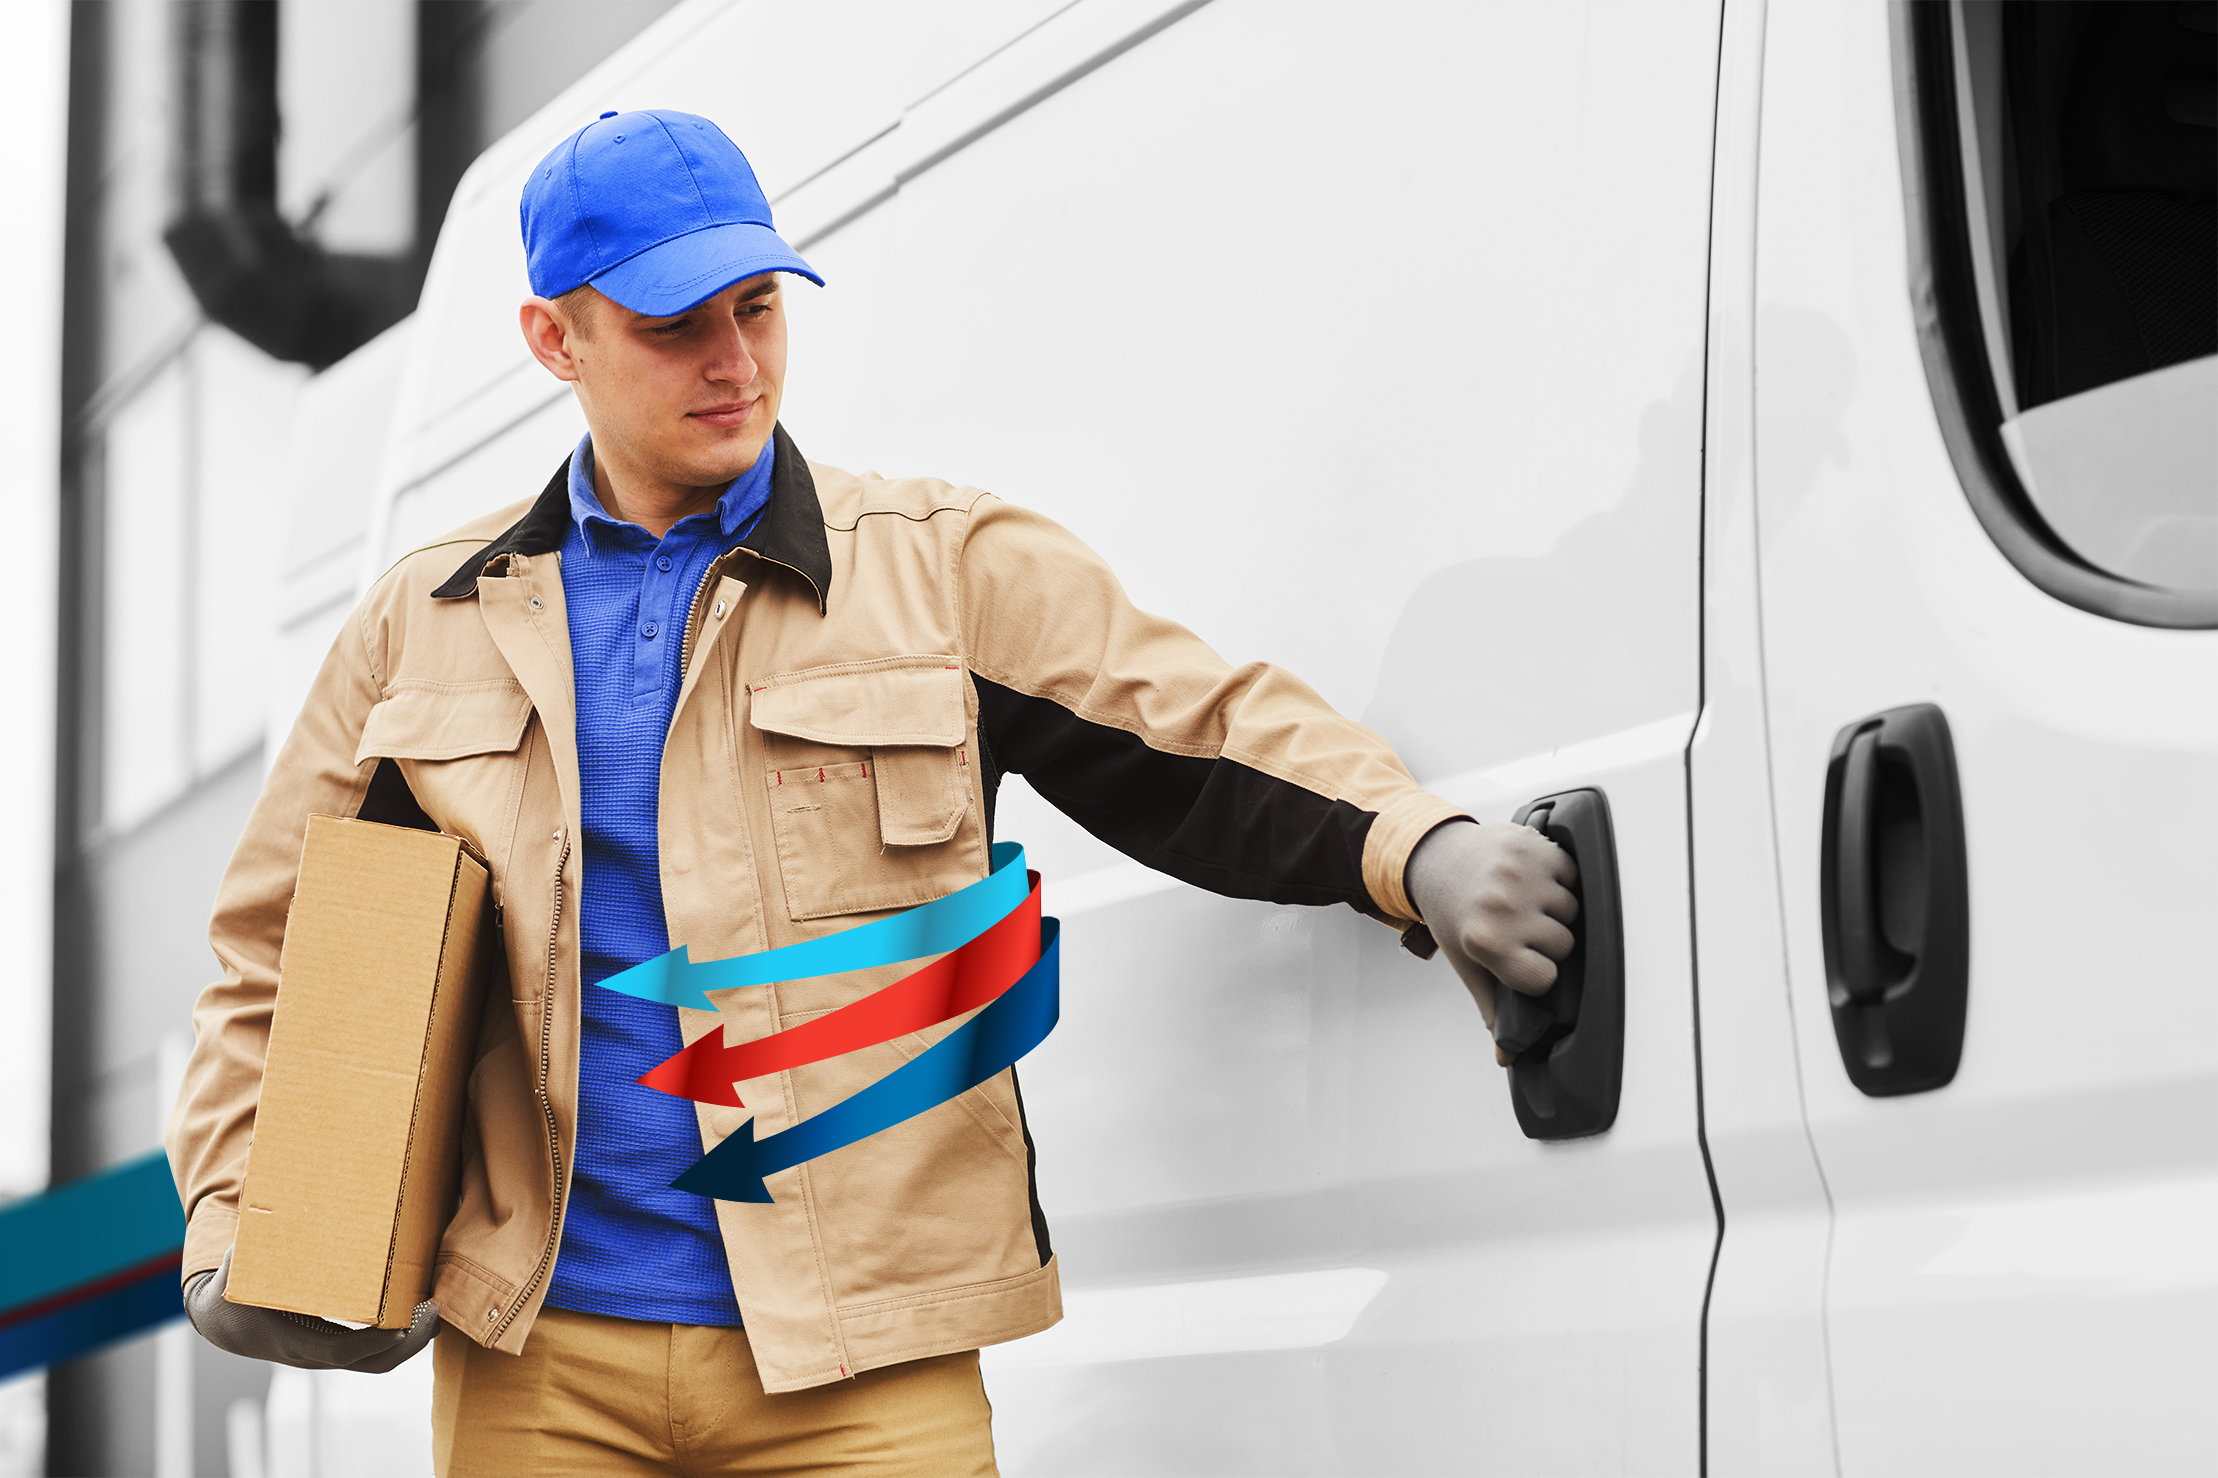 A courier male worker holding a parcel with Fleet Complete arrows wrapping around him in the process of opening a door of a white van.